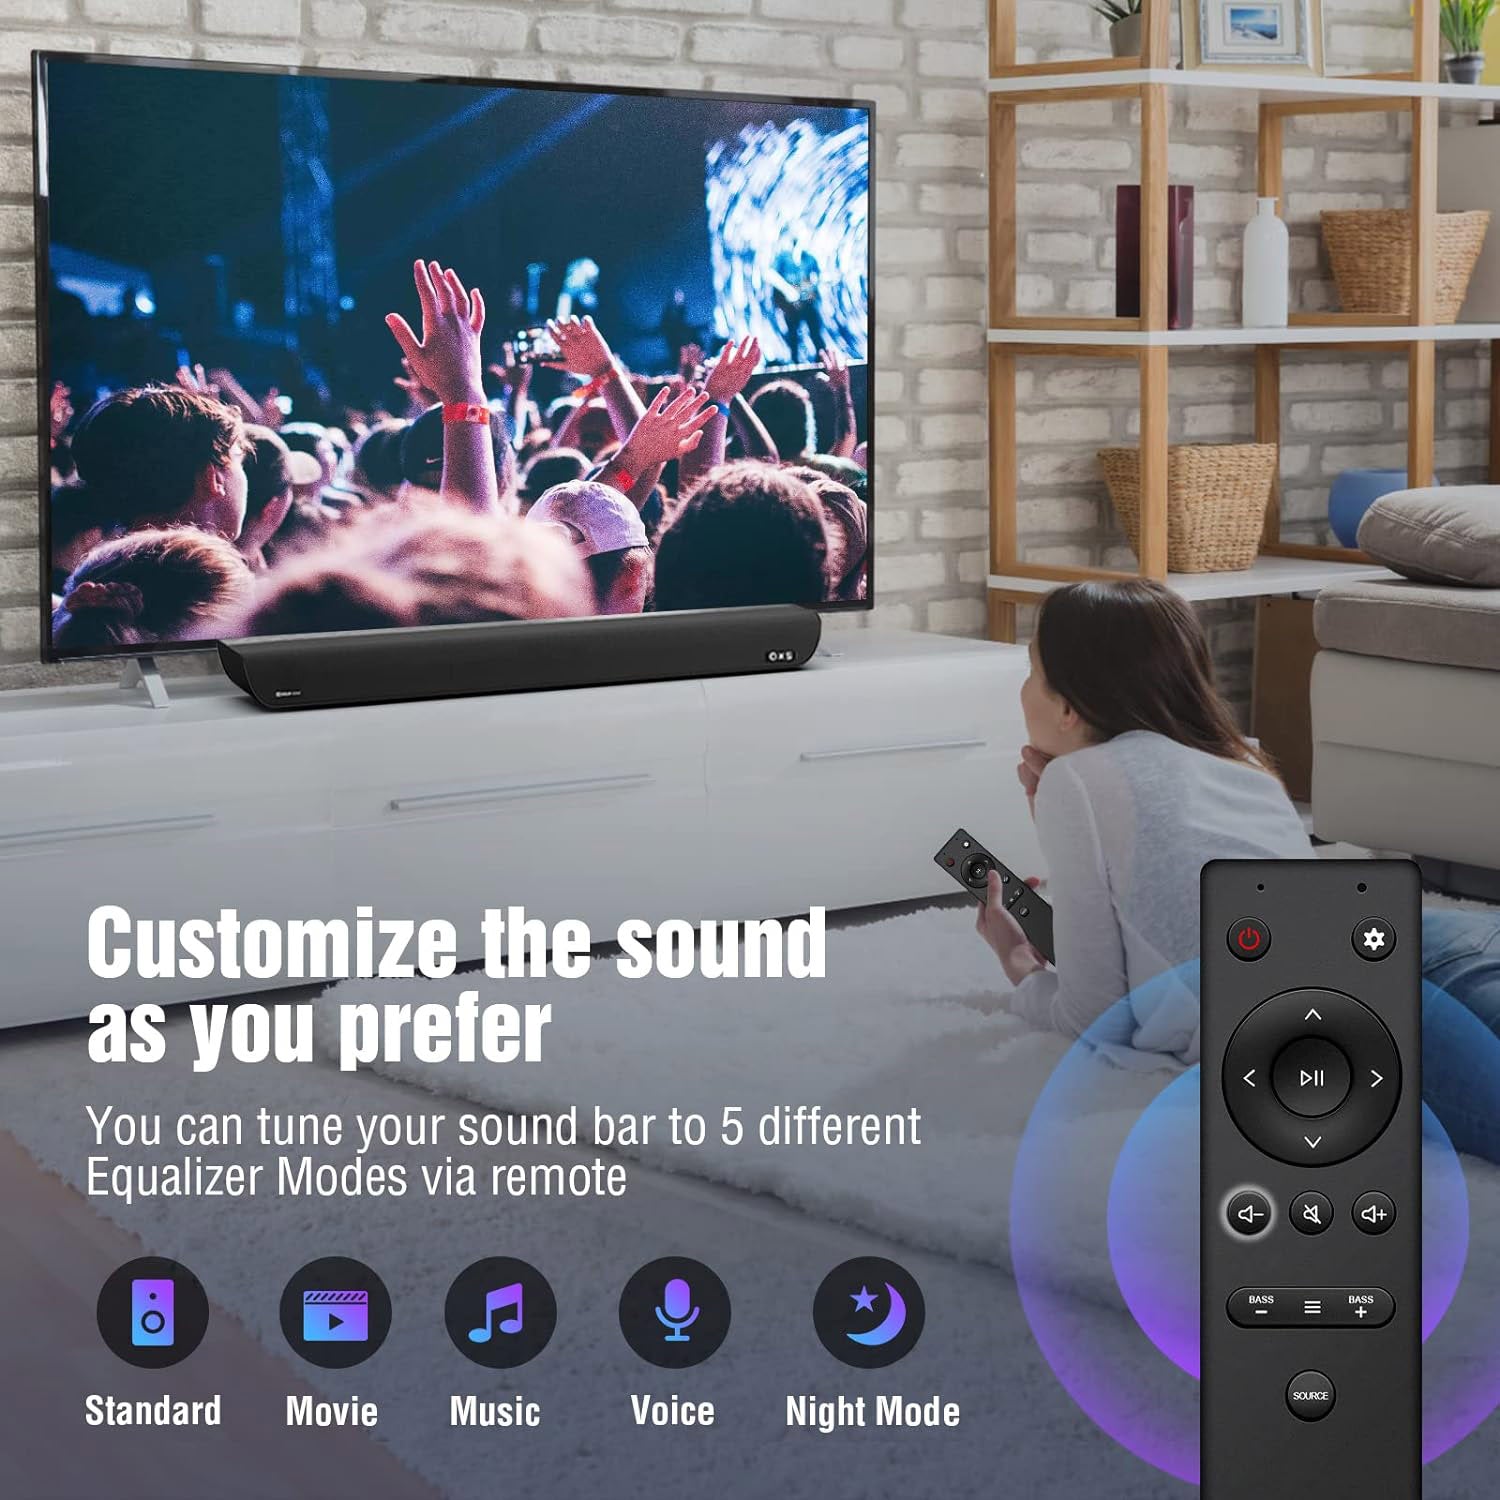 OXS S5 sound bar with subwoofer is designed with 5 sound modes to meet your daily needs. You can tune your sound bar to Standard Mode, Movie Mode, Music Mode, Voice Mode and Night Mode